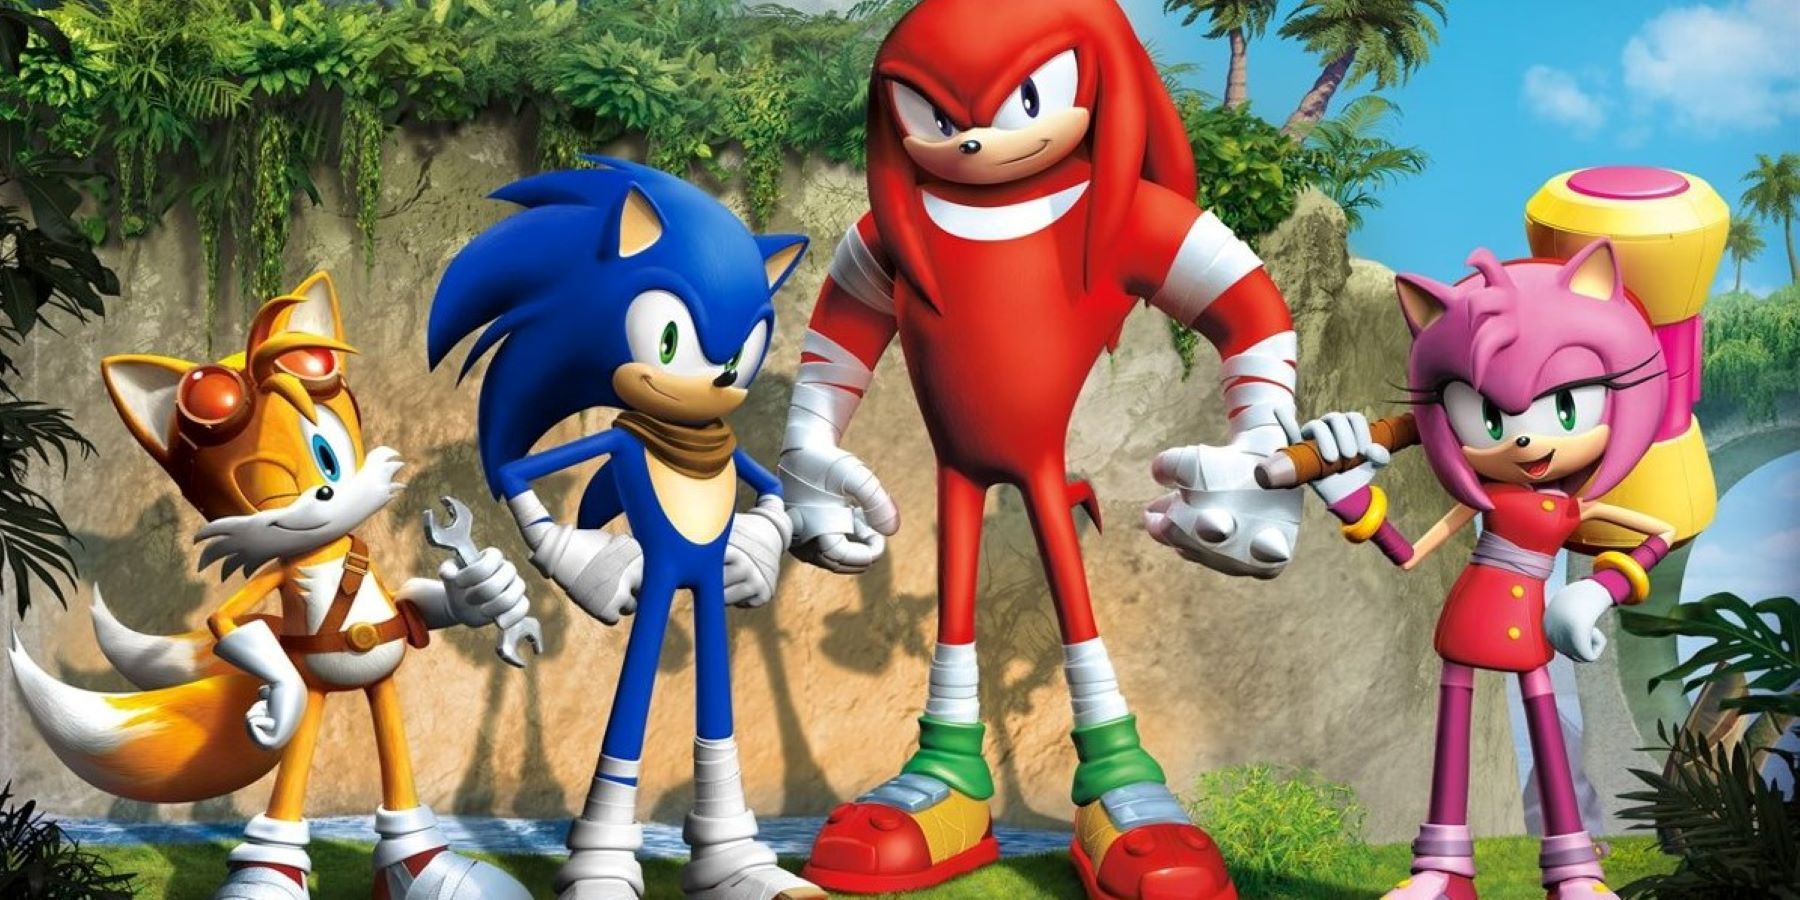 Sonic the Hedgehog's Tails, Sonic, Knuckles, and Amy in their Sonic Boom designs